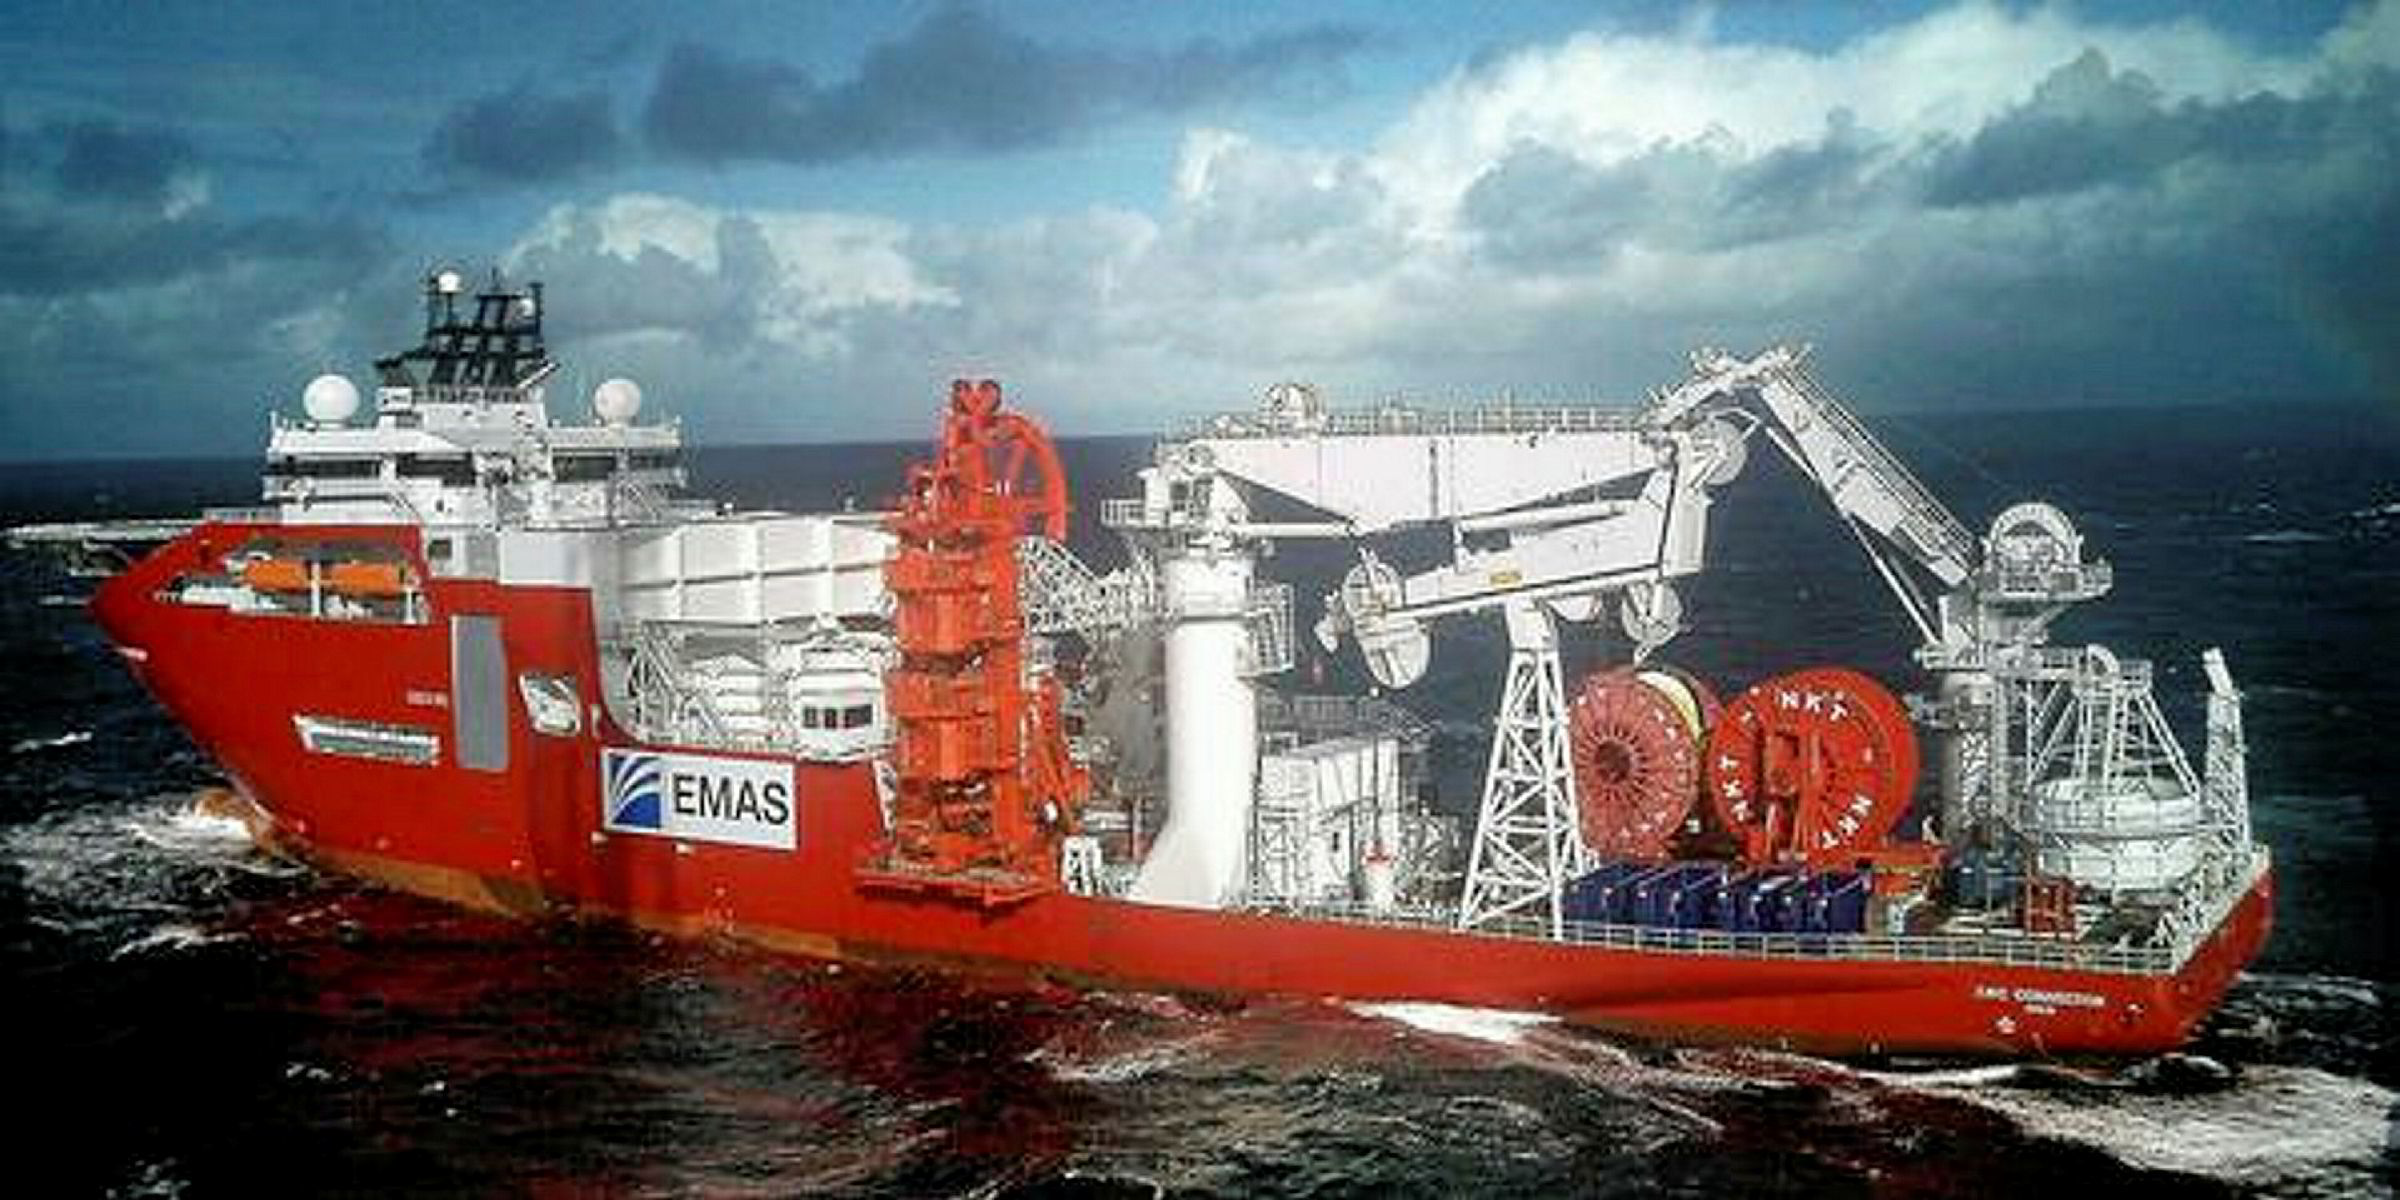 Emas flags potential $50m injection | Upstream Online